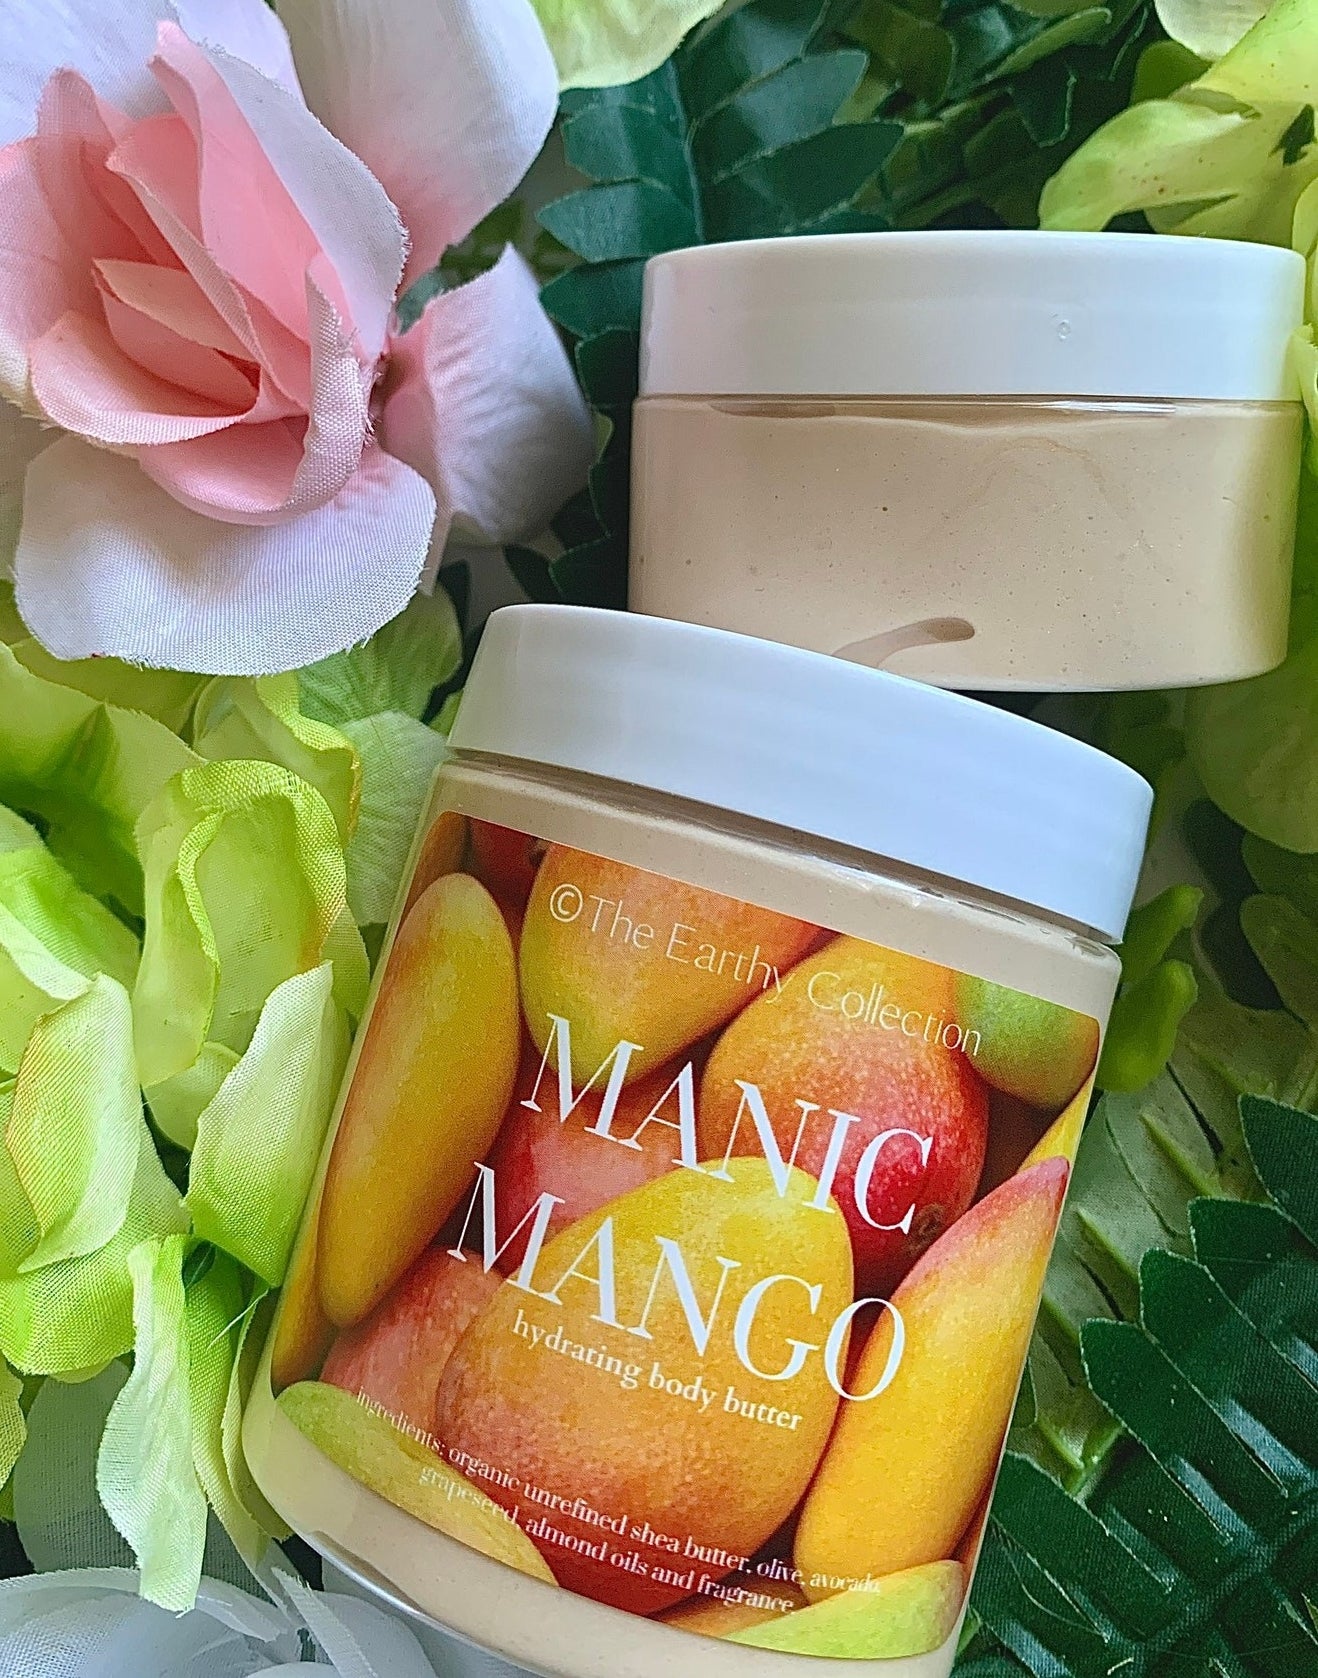 Two jars of orange body butter with photo of mangos on label